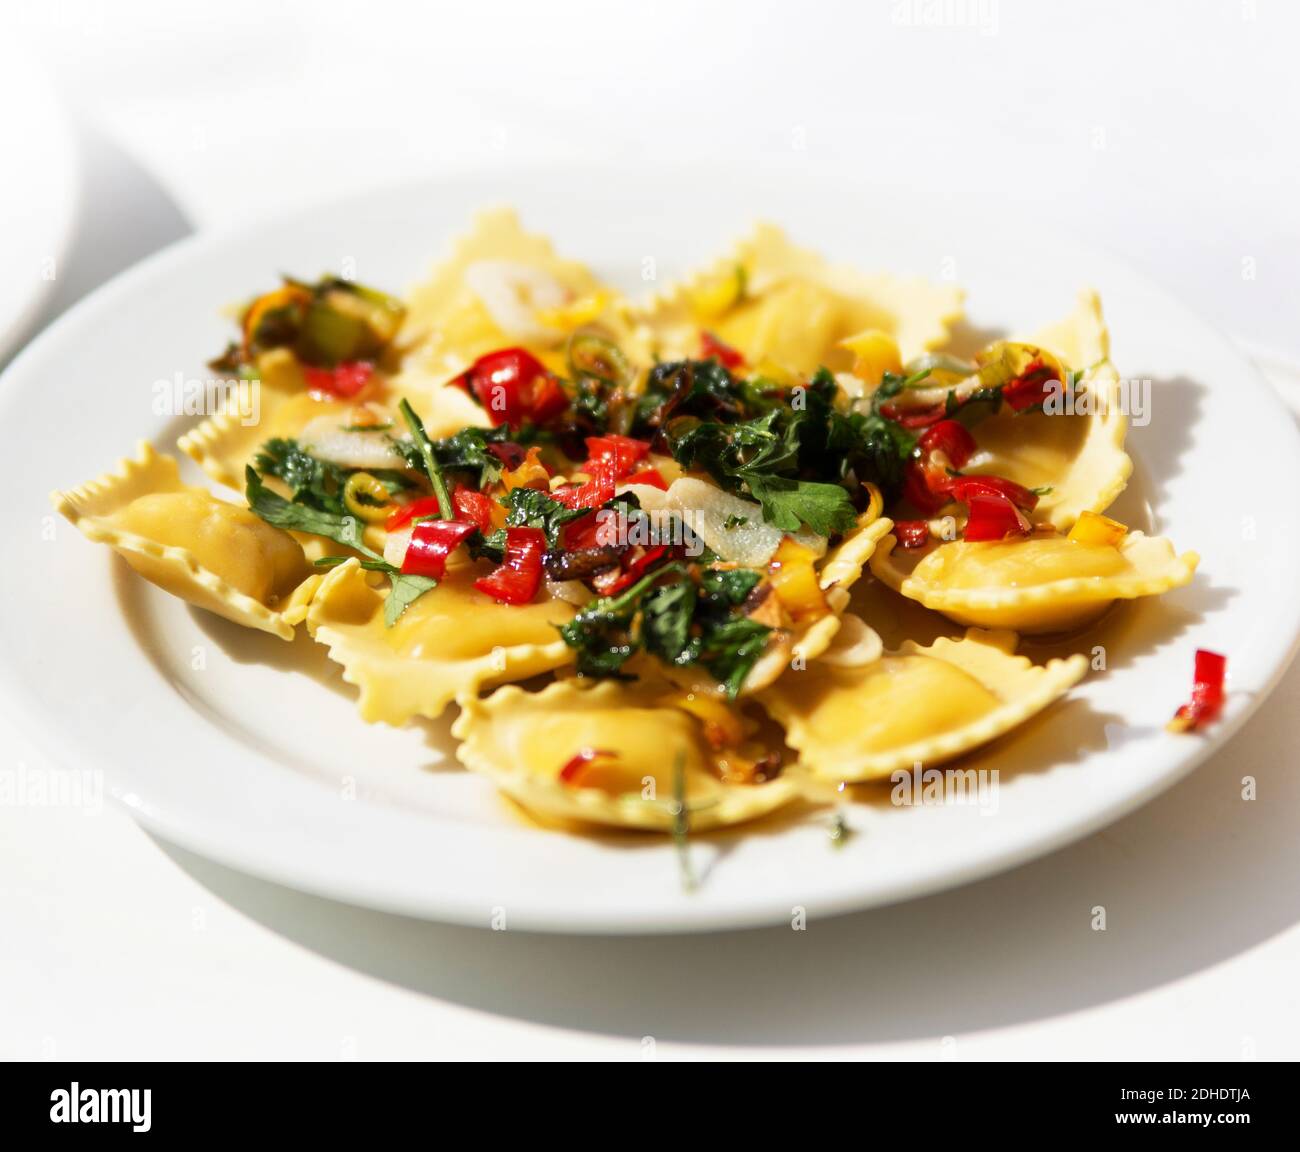 Ravioli garnished with basil leaves on white plate Stock Photo